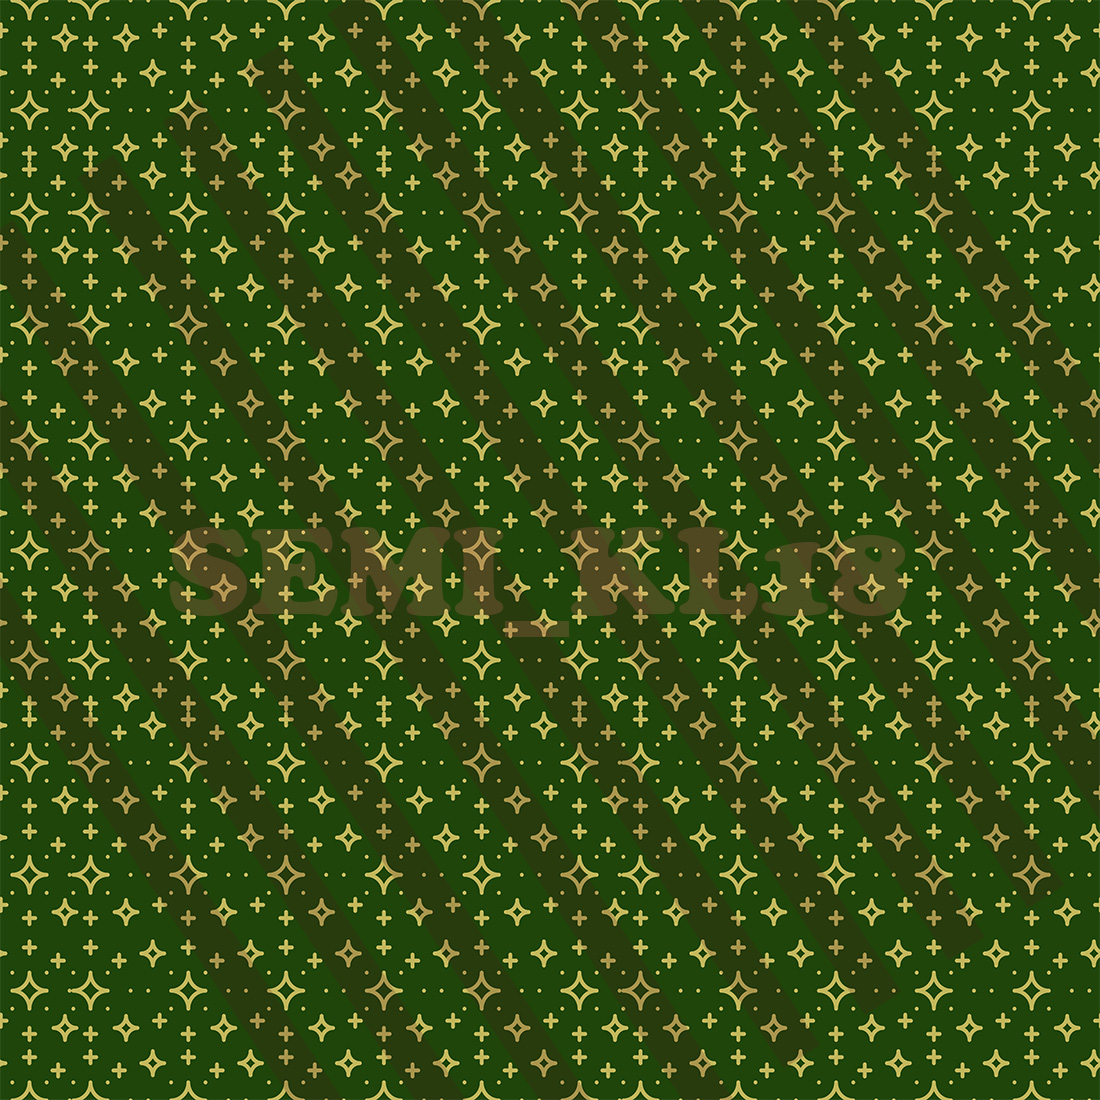 Green and gold background with a pattern.